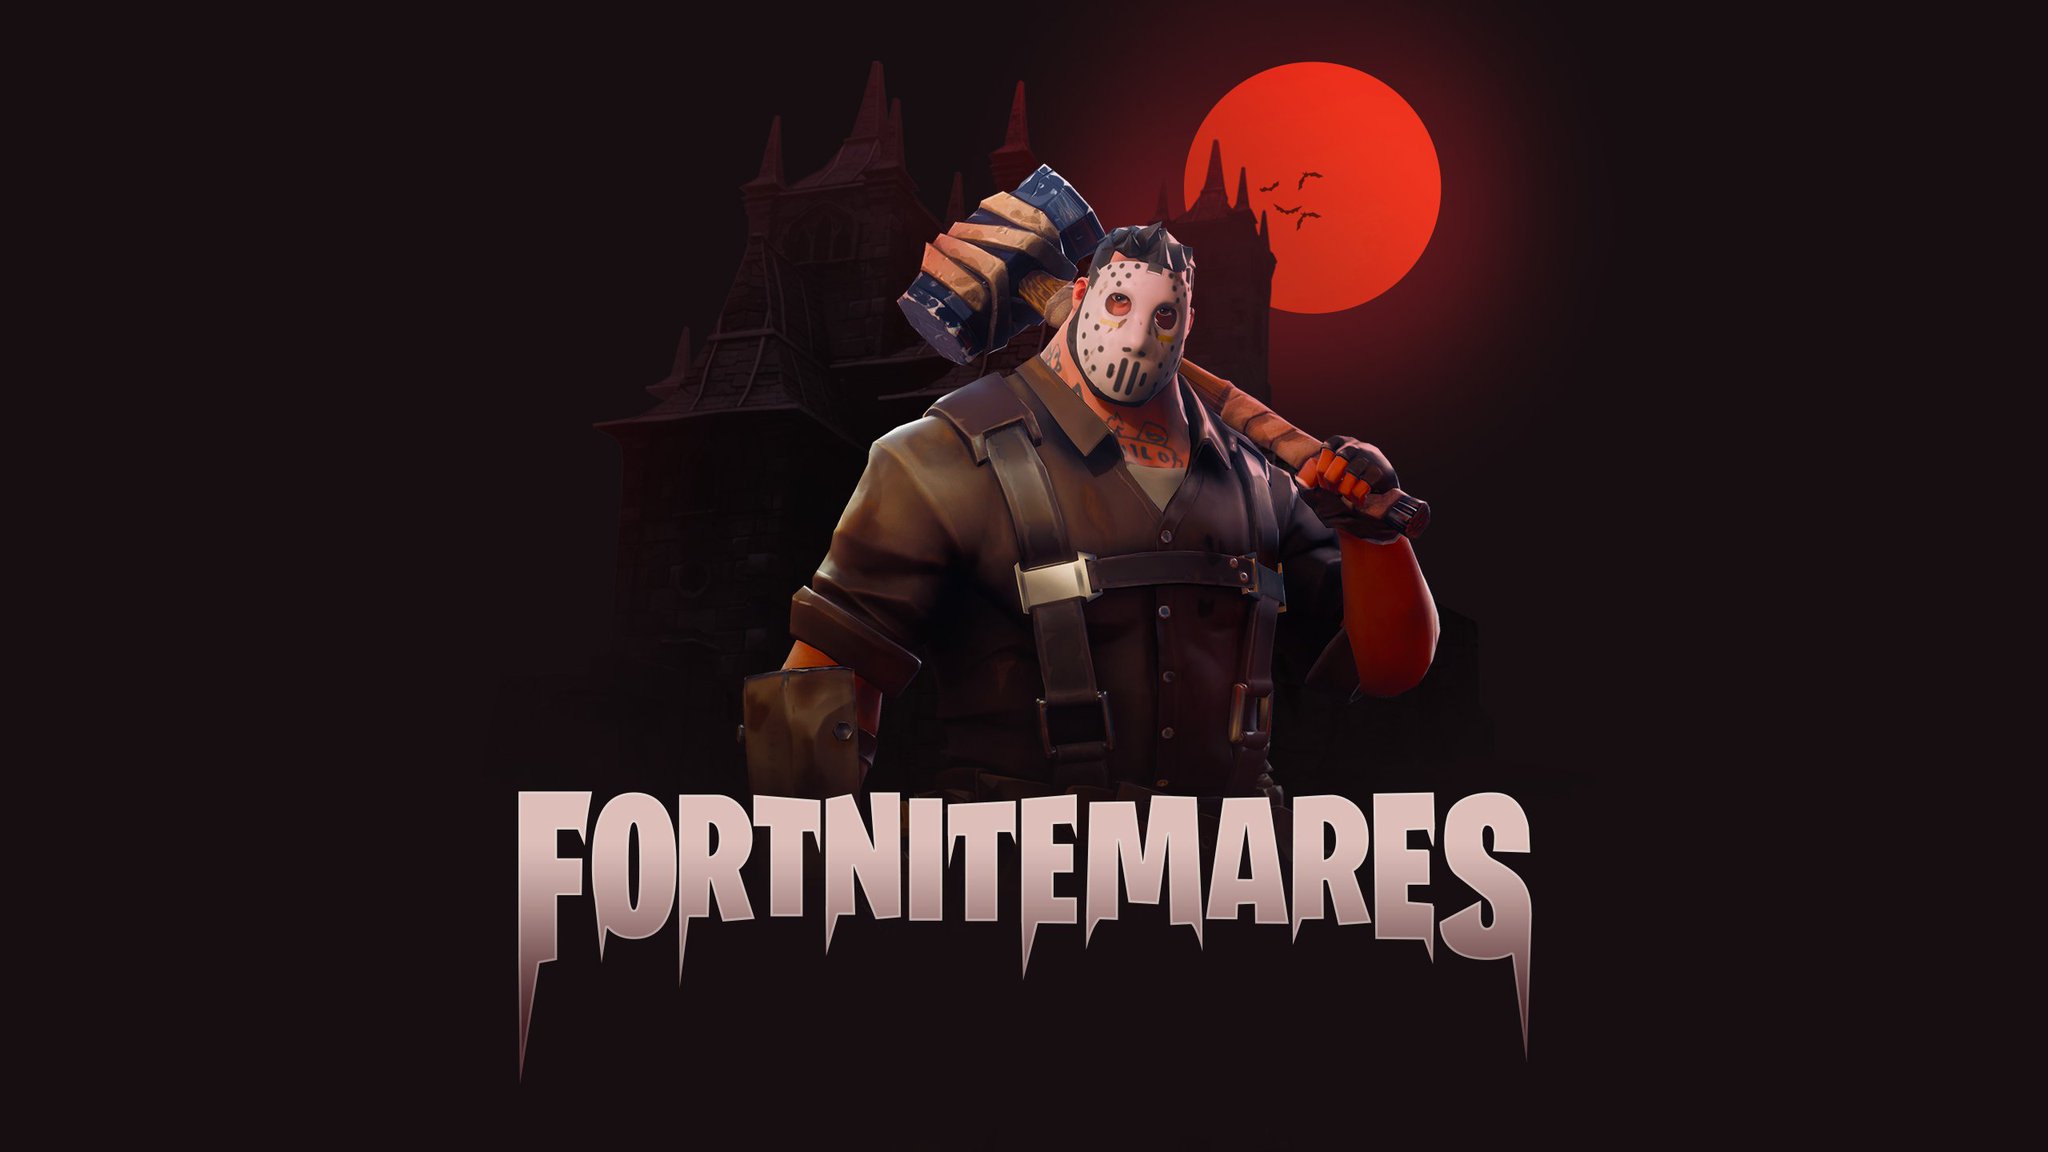 Fortnite On Twitter Turn Up The Spookiness Setting On Your